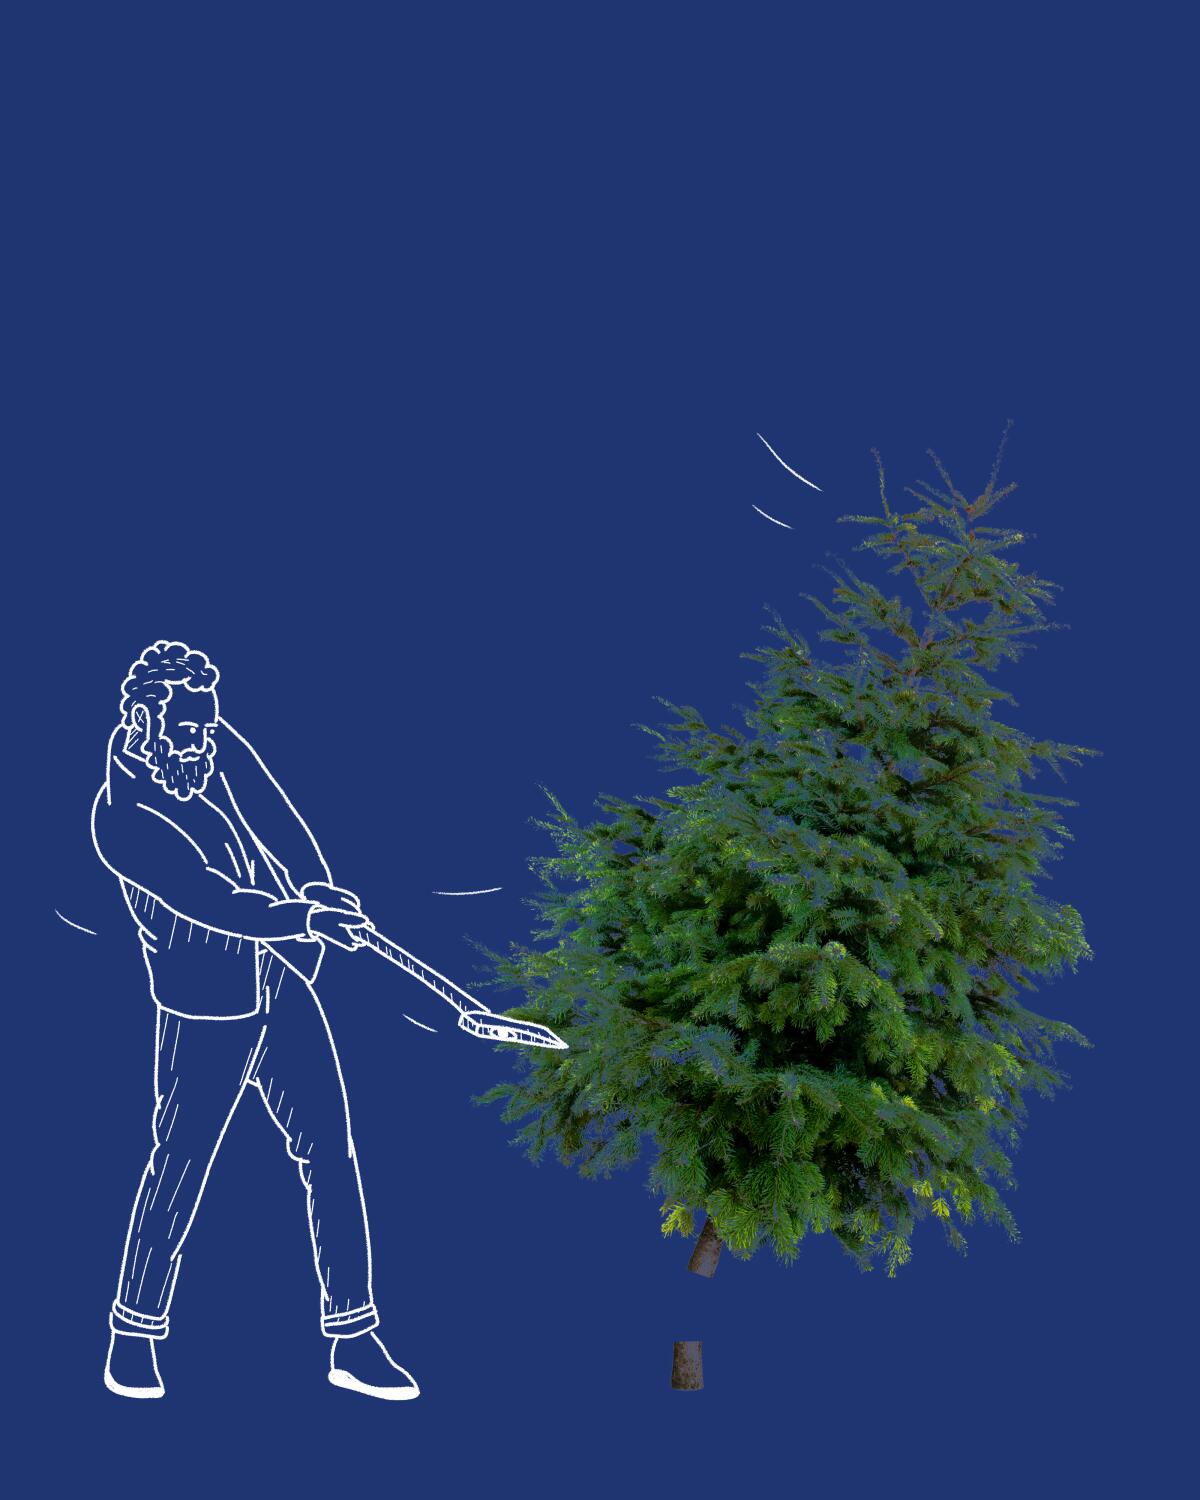 There are plenty of places in L.A. to cut your own Christmas tree.